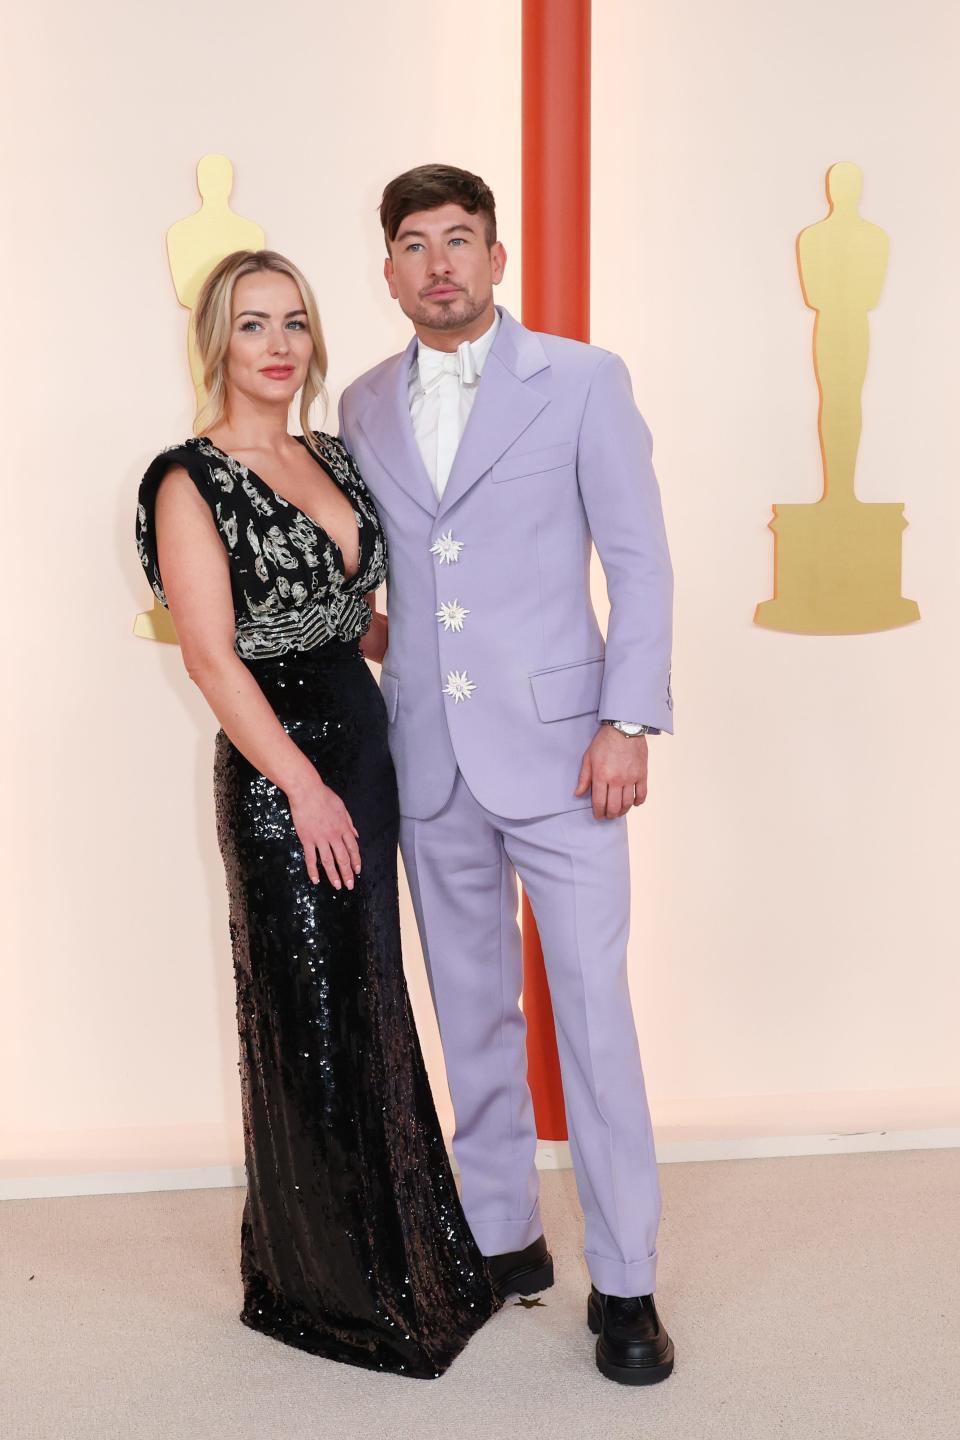 Alyson Sandro and Barry Keoghan attend the 95th Academy Awards at the Dolby Theatre on March 12, 2023